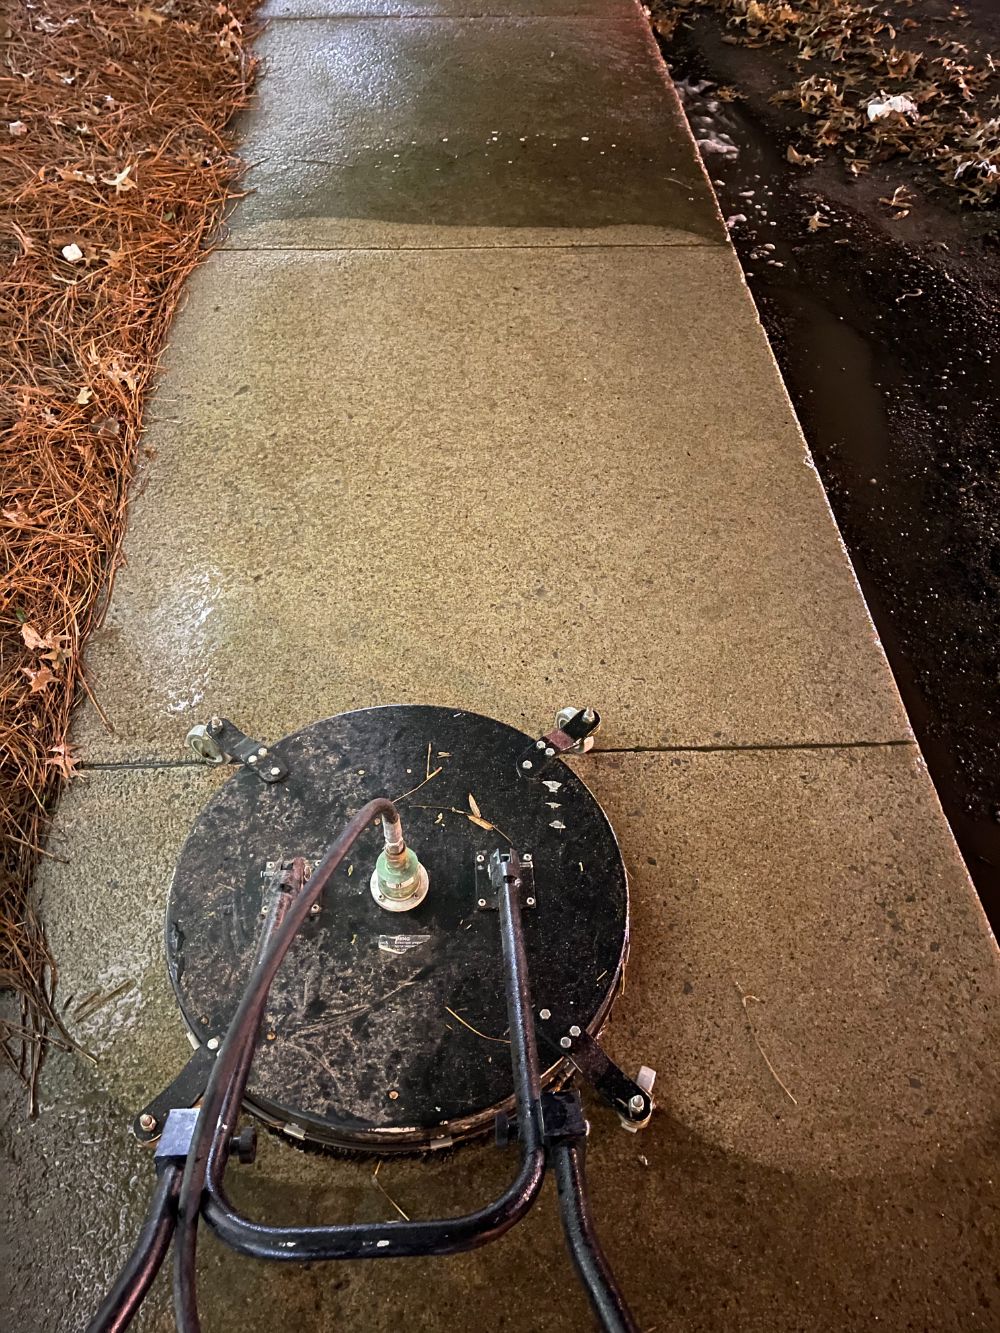 Concrete cleaning in Brentwood, TN